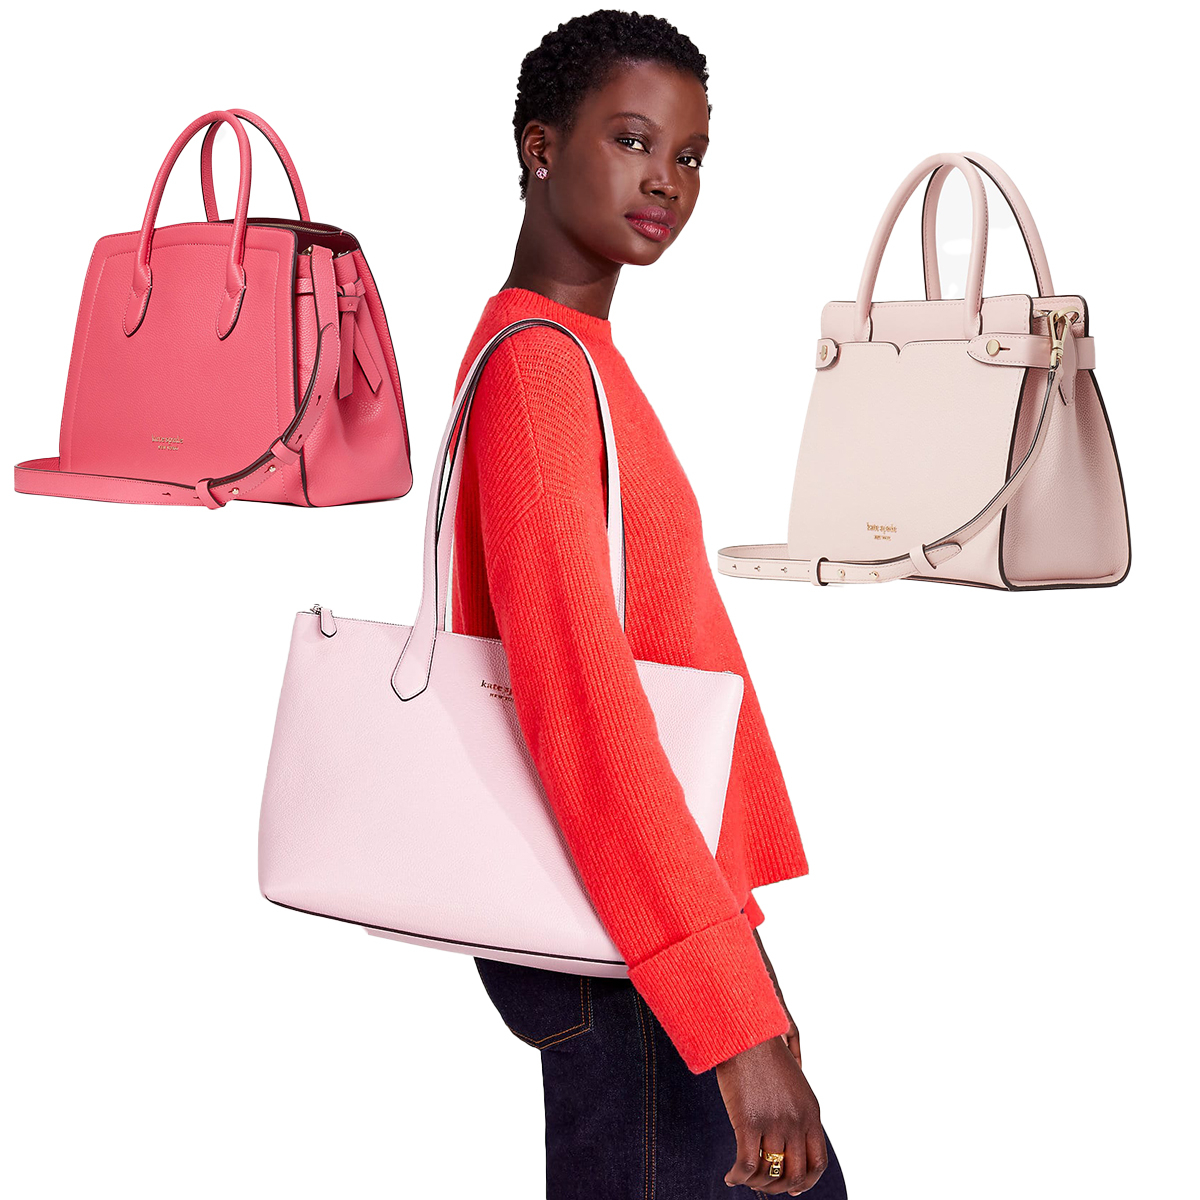 Get These Kate Spade Bags for 50% Off & More Deals Starting at $15 - E!  Online